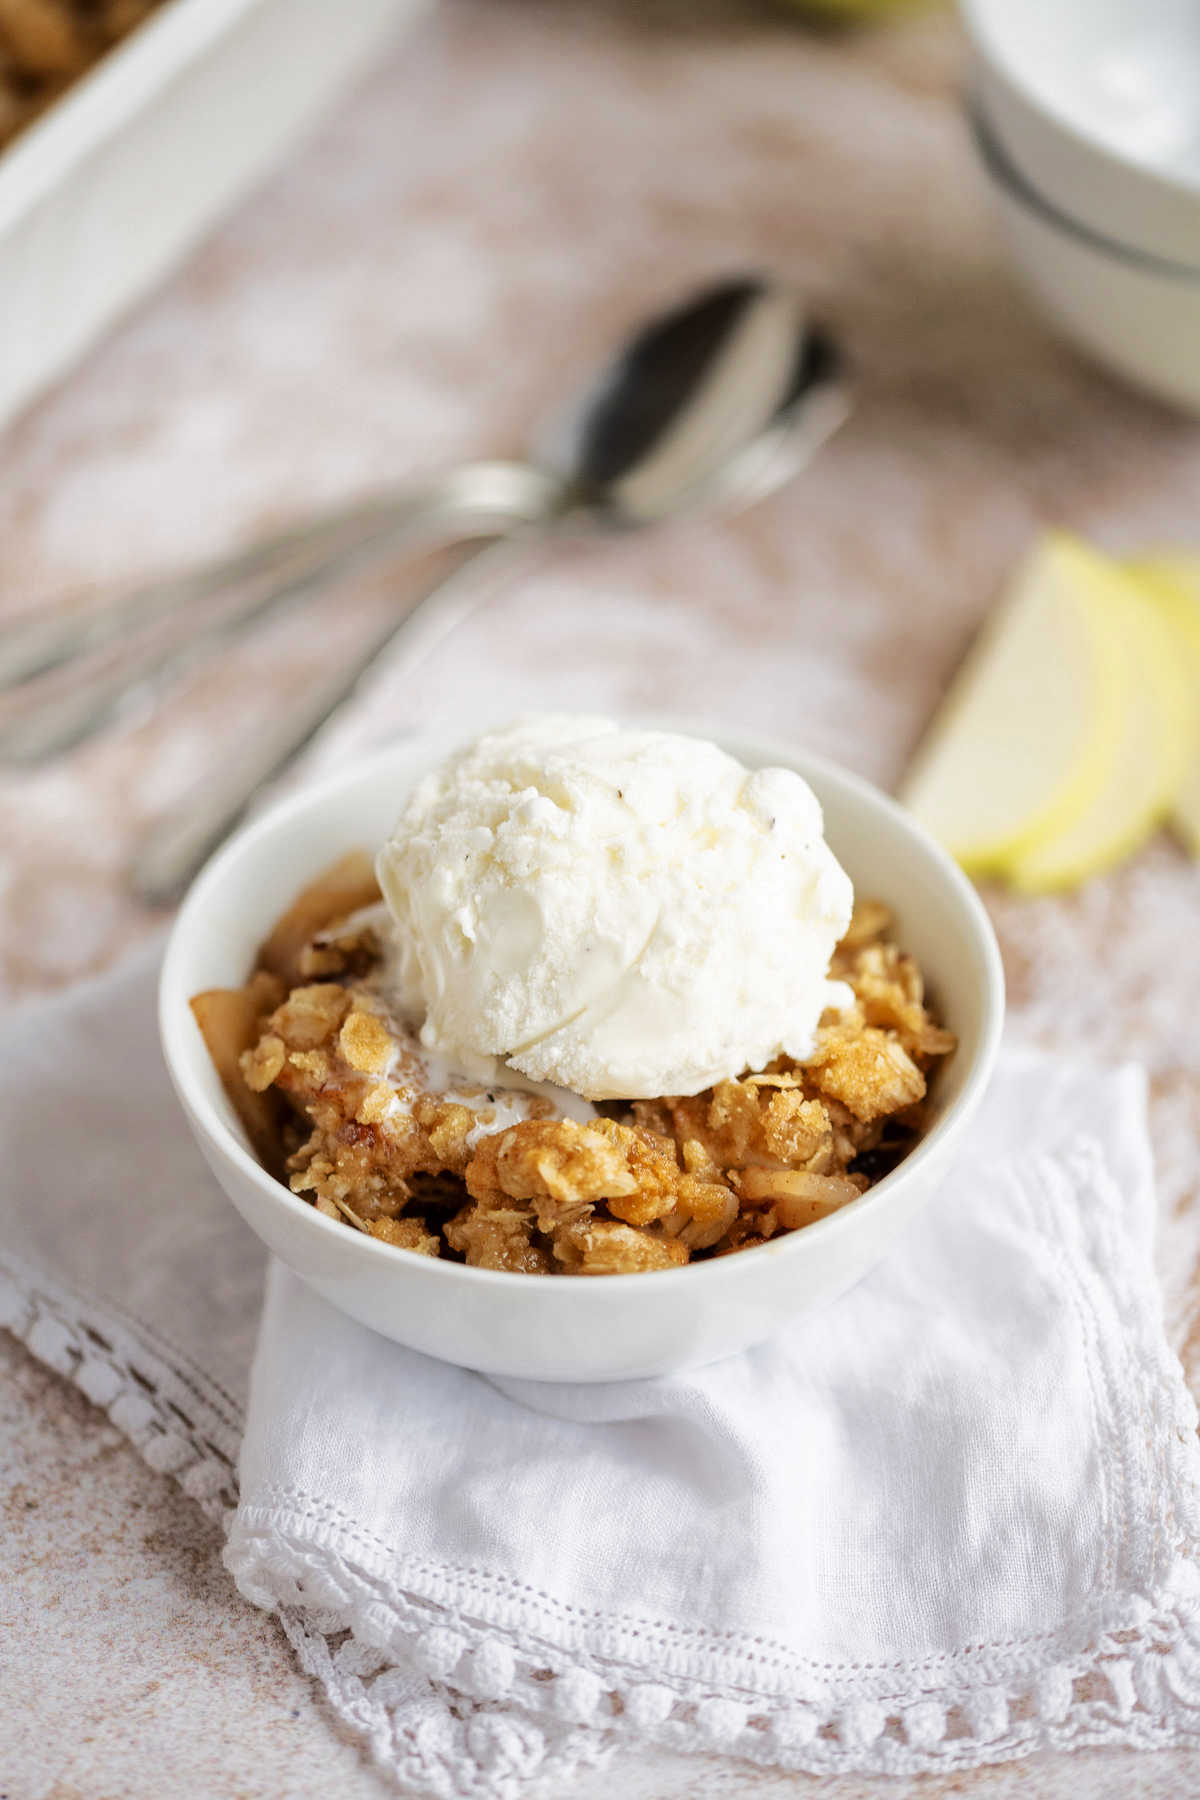 apple crisp in a white bowl with a scoop of vanilla ice cream on top sitting on a counter with apple and baking dish in the background.